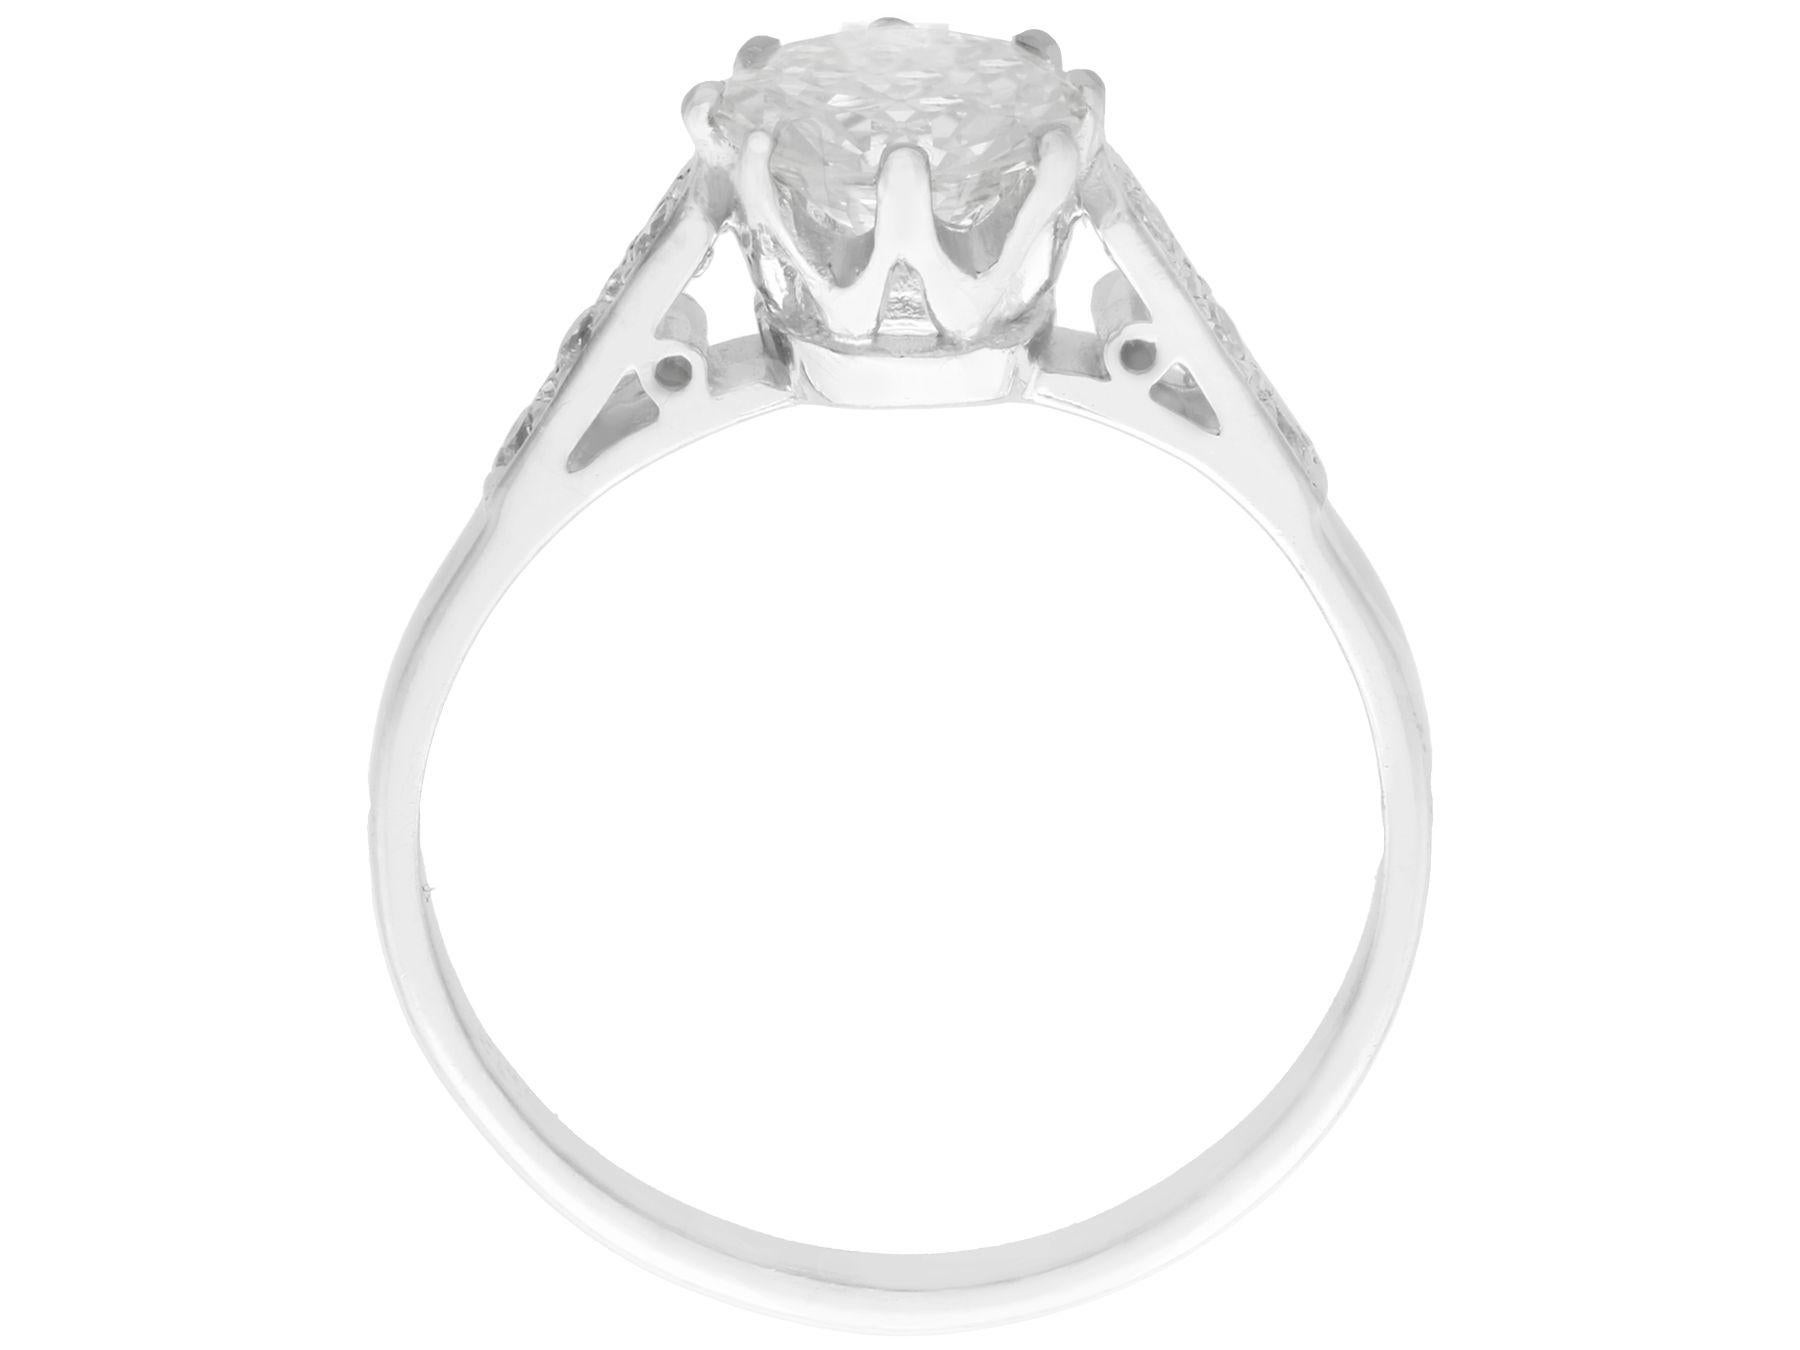 1920s engagement ring styles